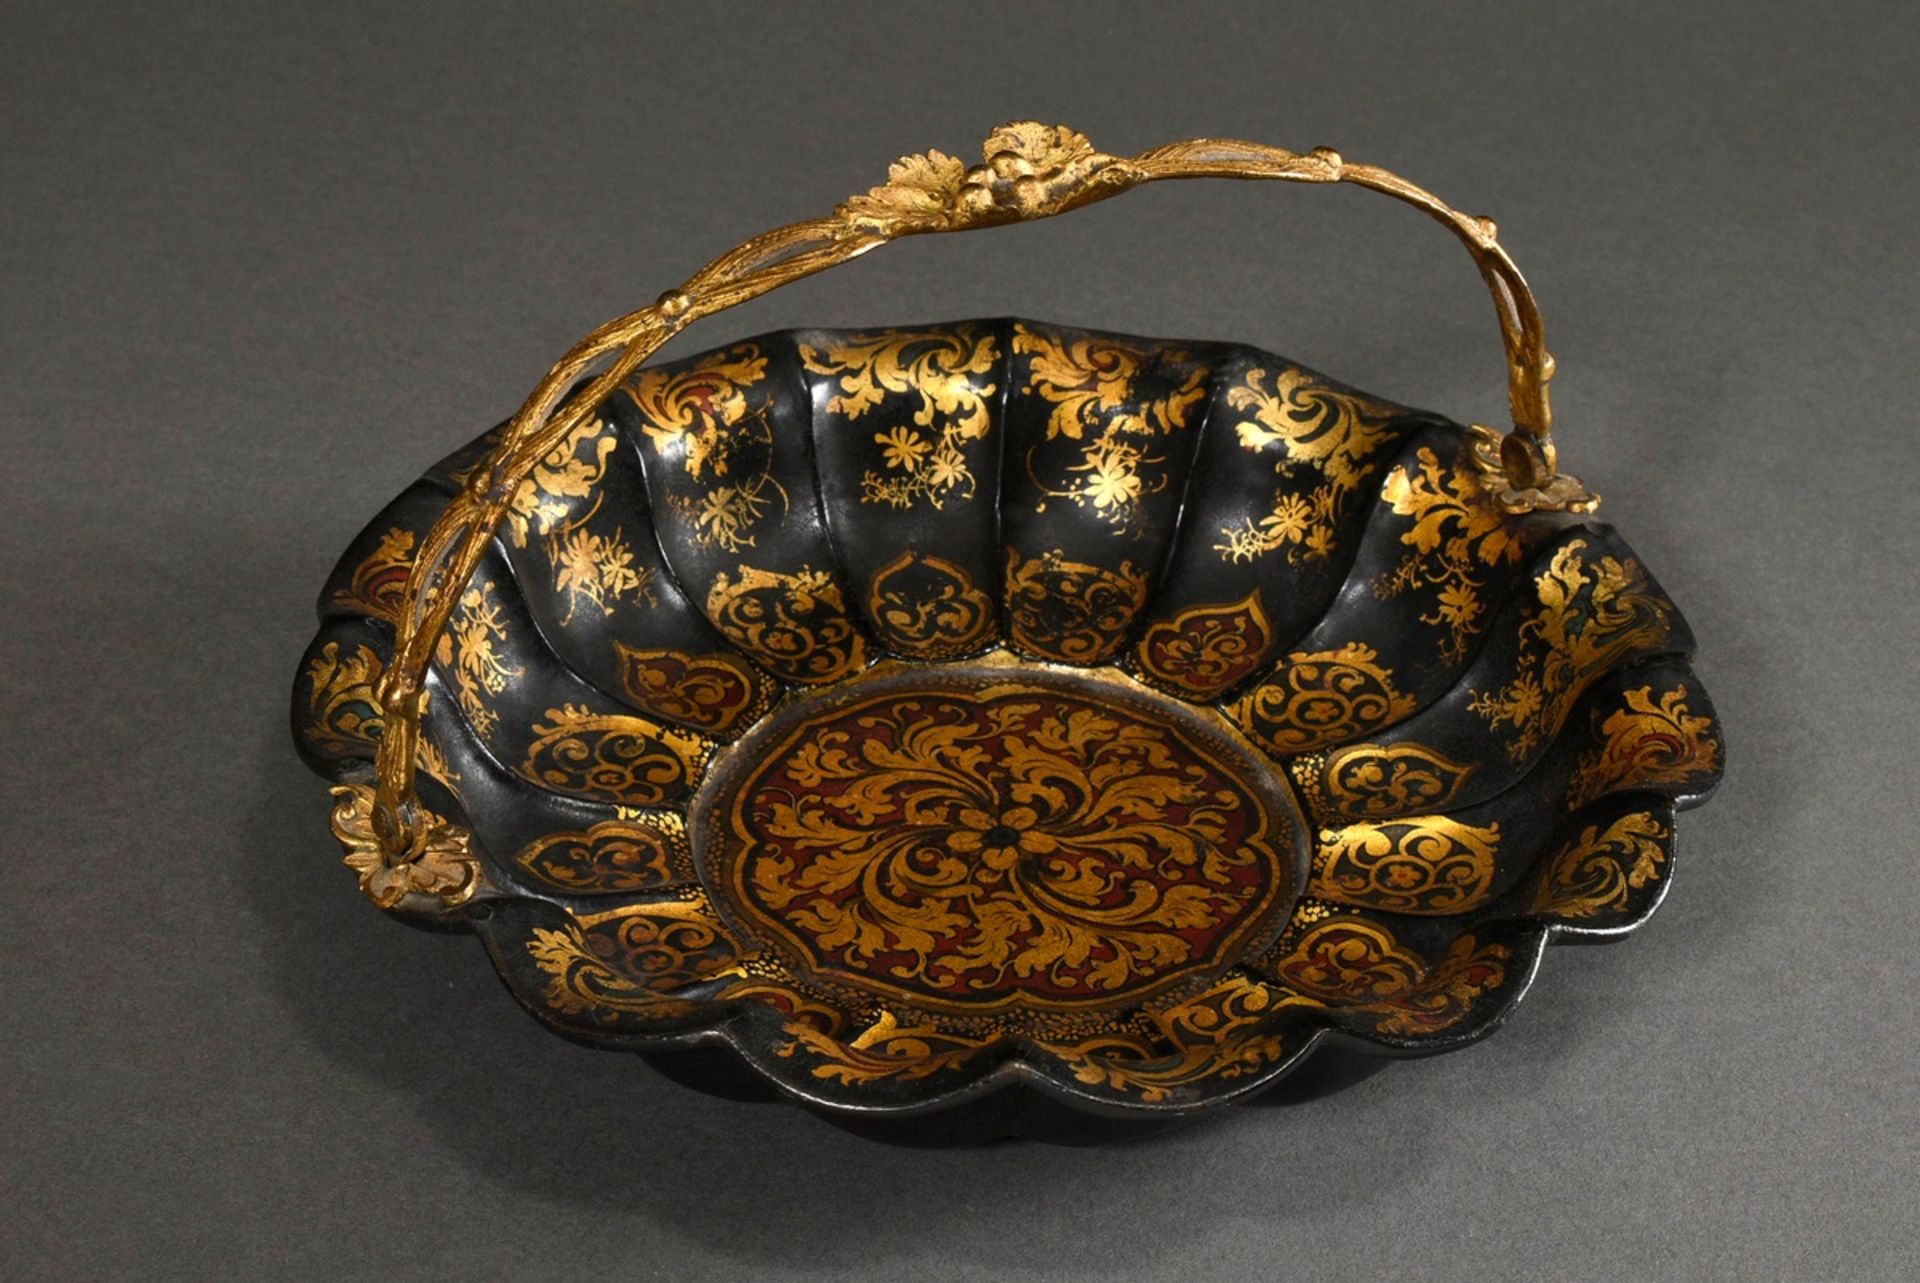 Flower-shaped papier-mâché bowl with a vegetal metal handle and floral gold painting on a red and g